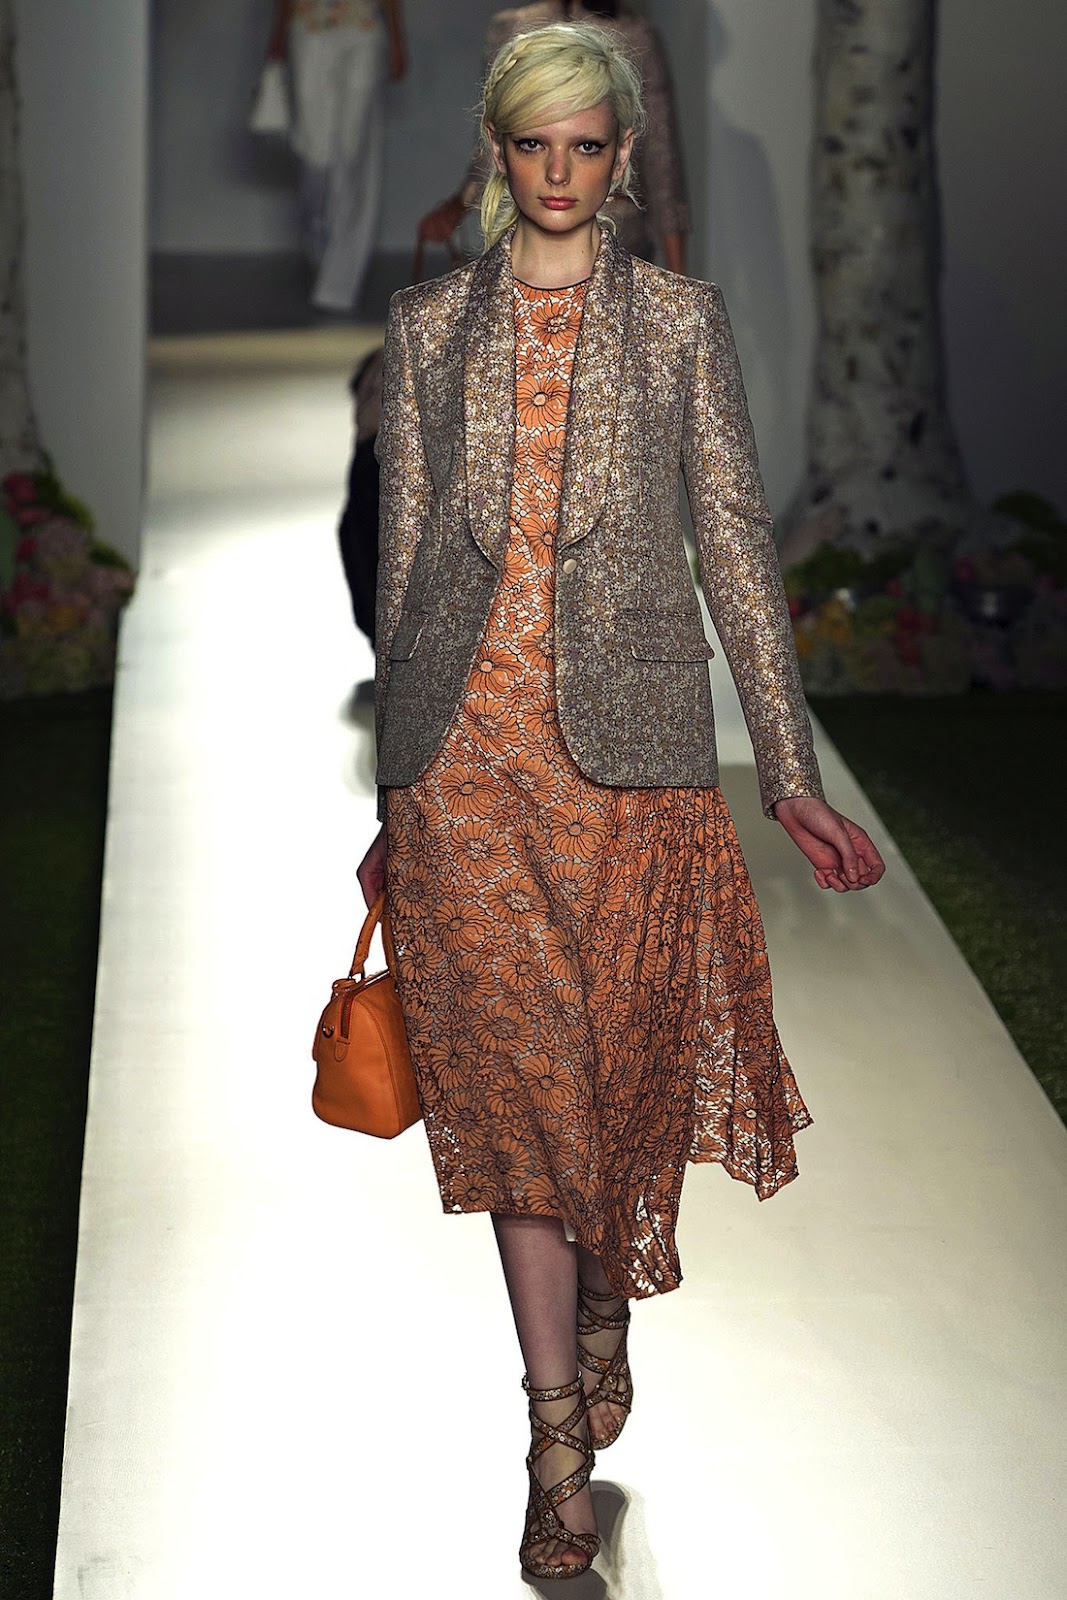 mulberry s/s 13 london | visual optimism; fashion editorials, shows ...